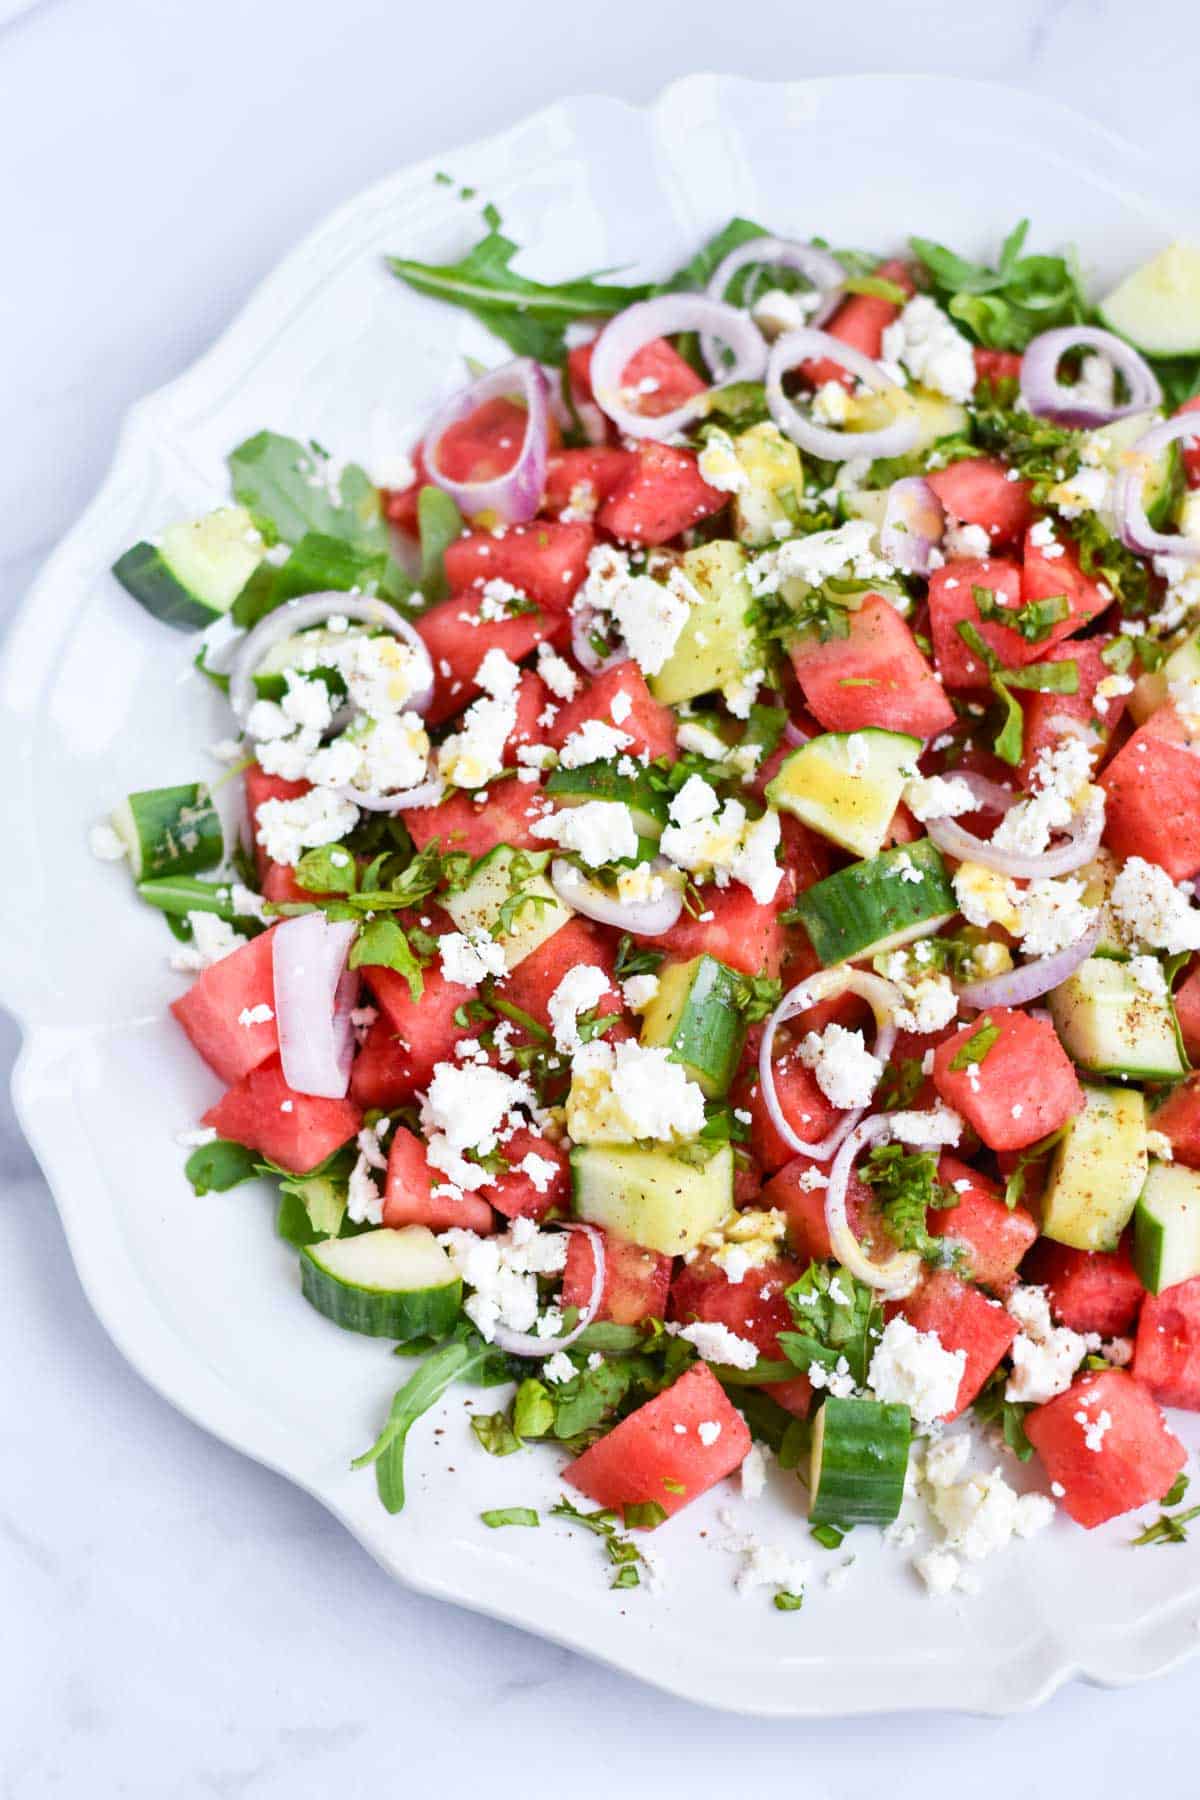 Watermelon salad with arugula on a white scalloped serving plate.